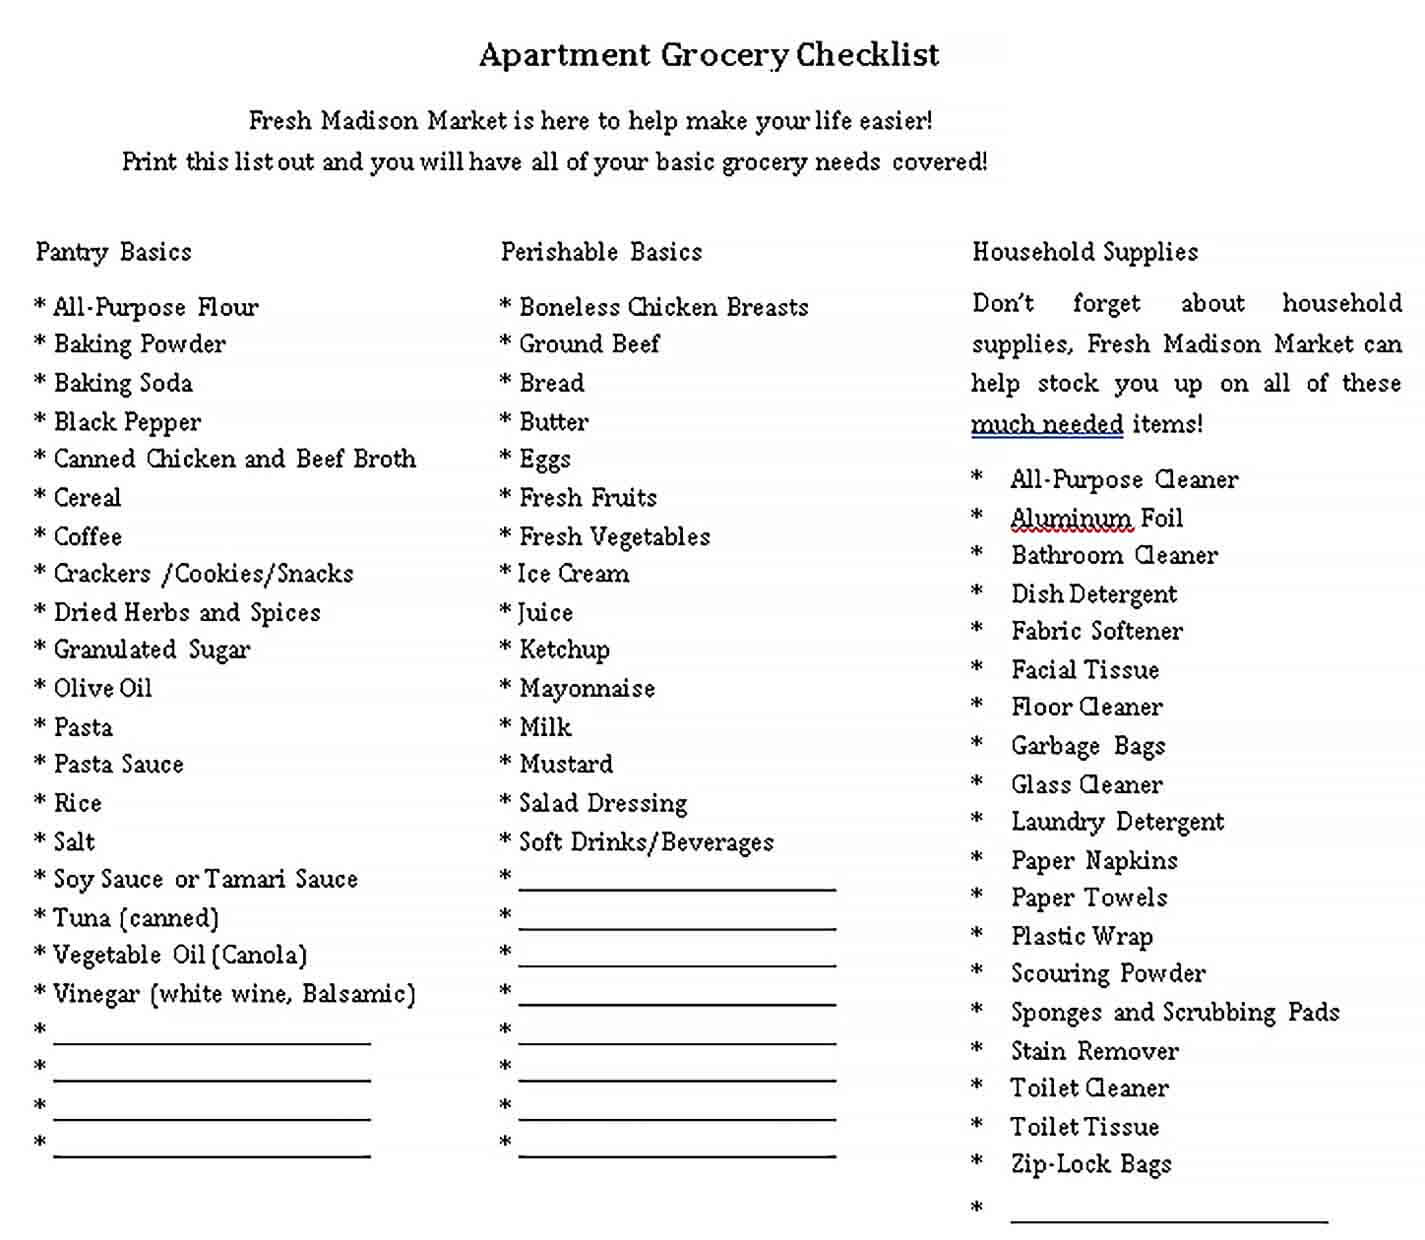 Sample New Apartment Grocery Checklist